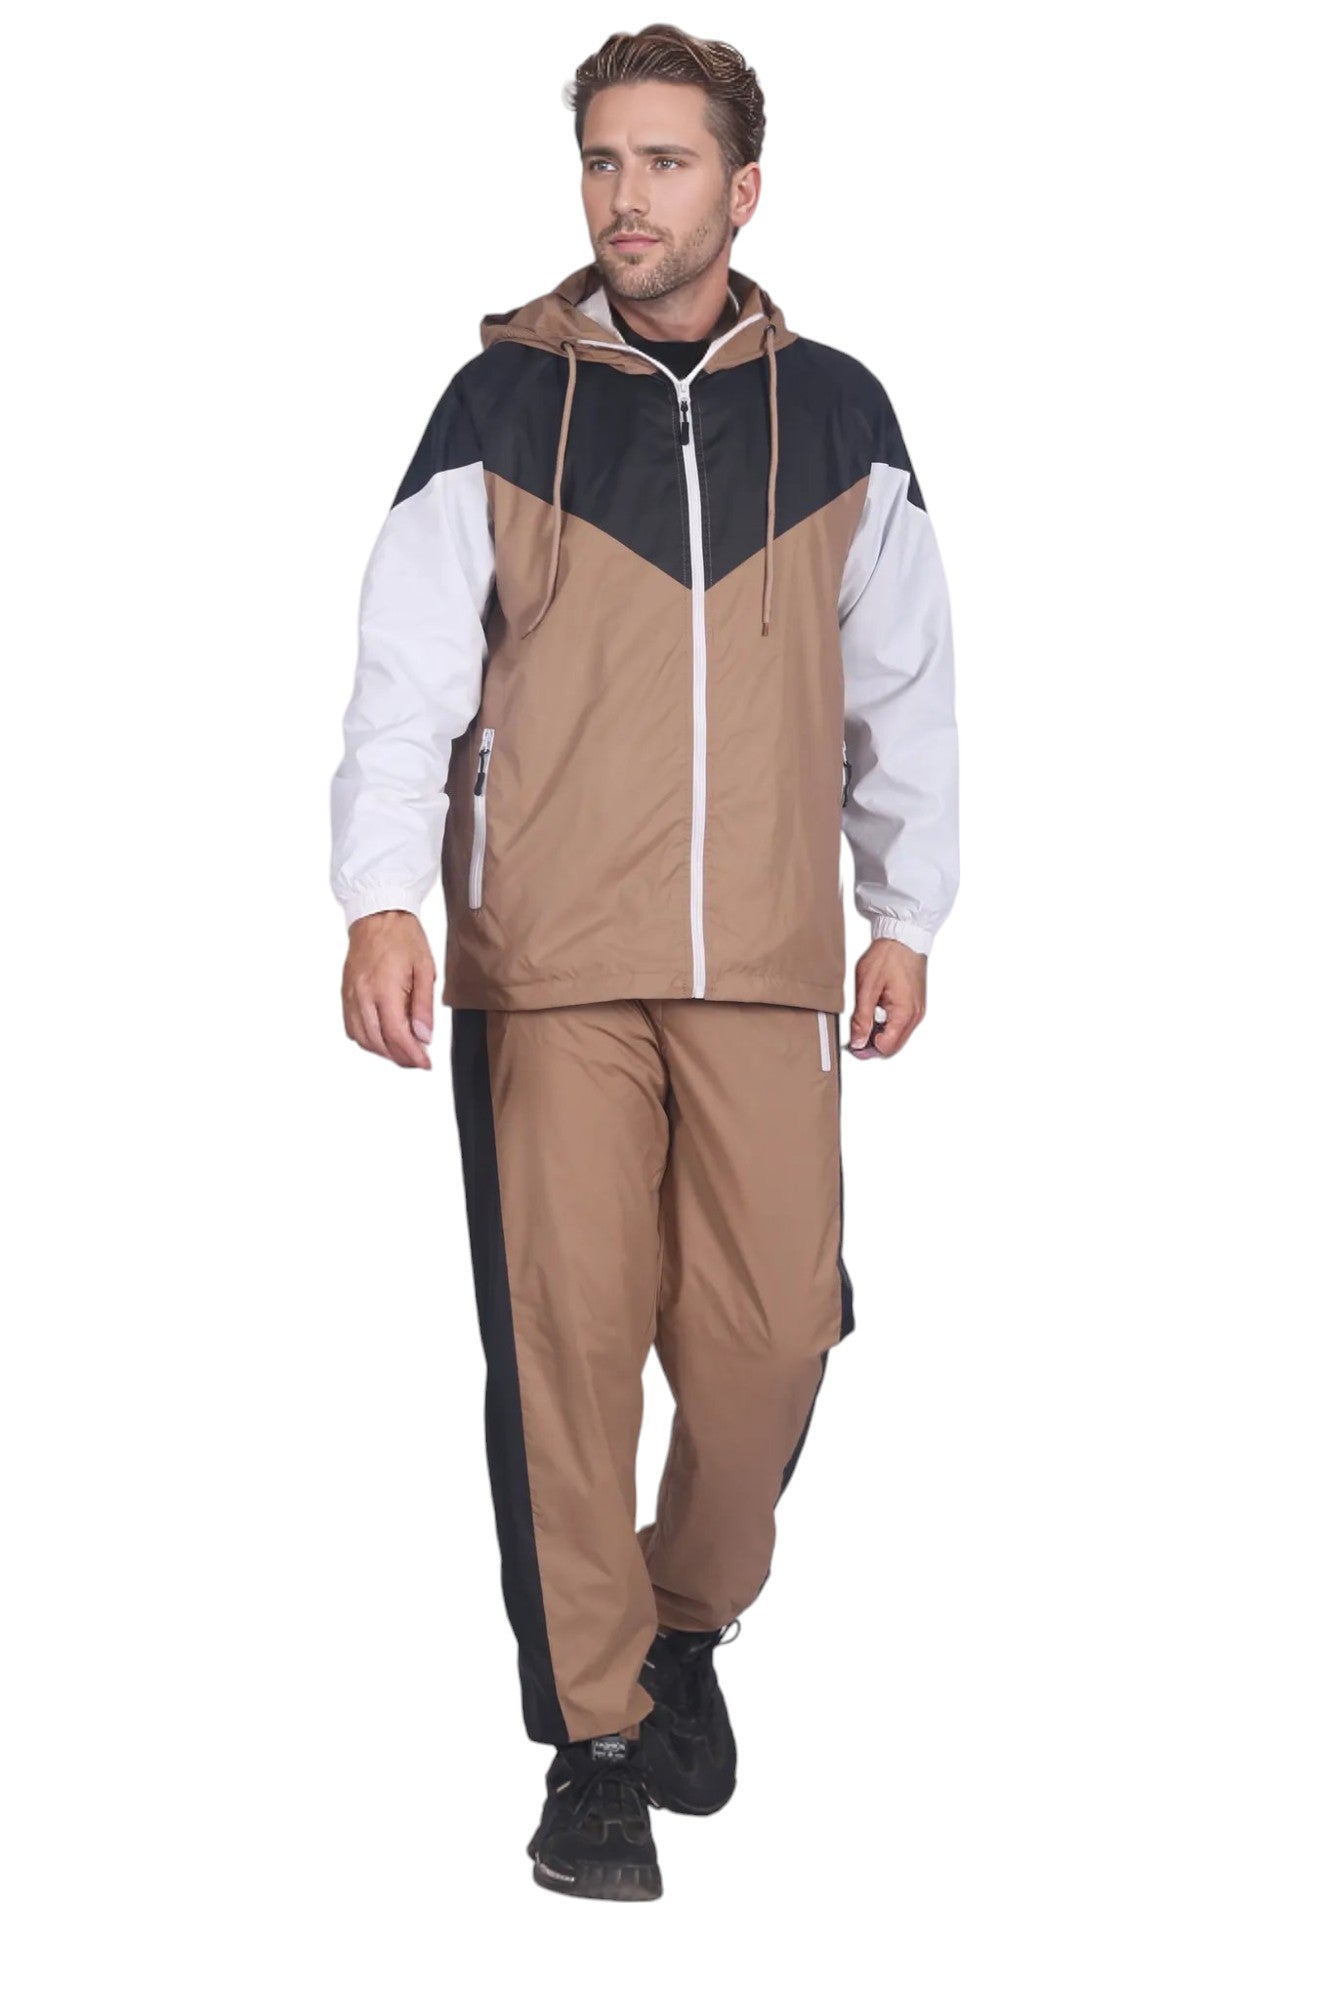 Men’s Colorful Hooded Windbreaker Sweatsuit Meshed Lined Nylon Water Repellent GYM Outfit